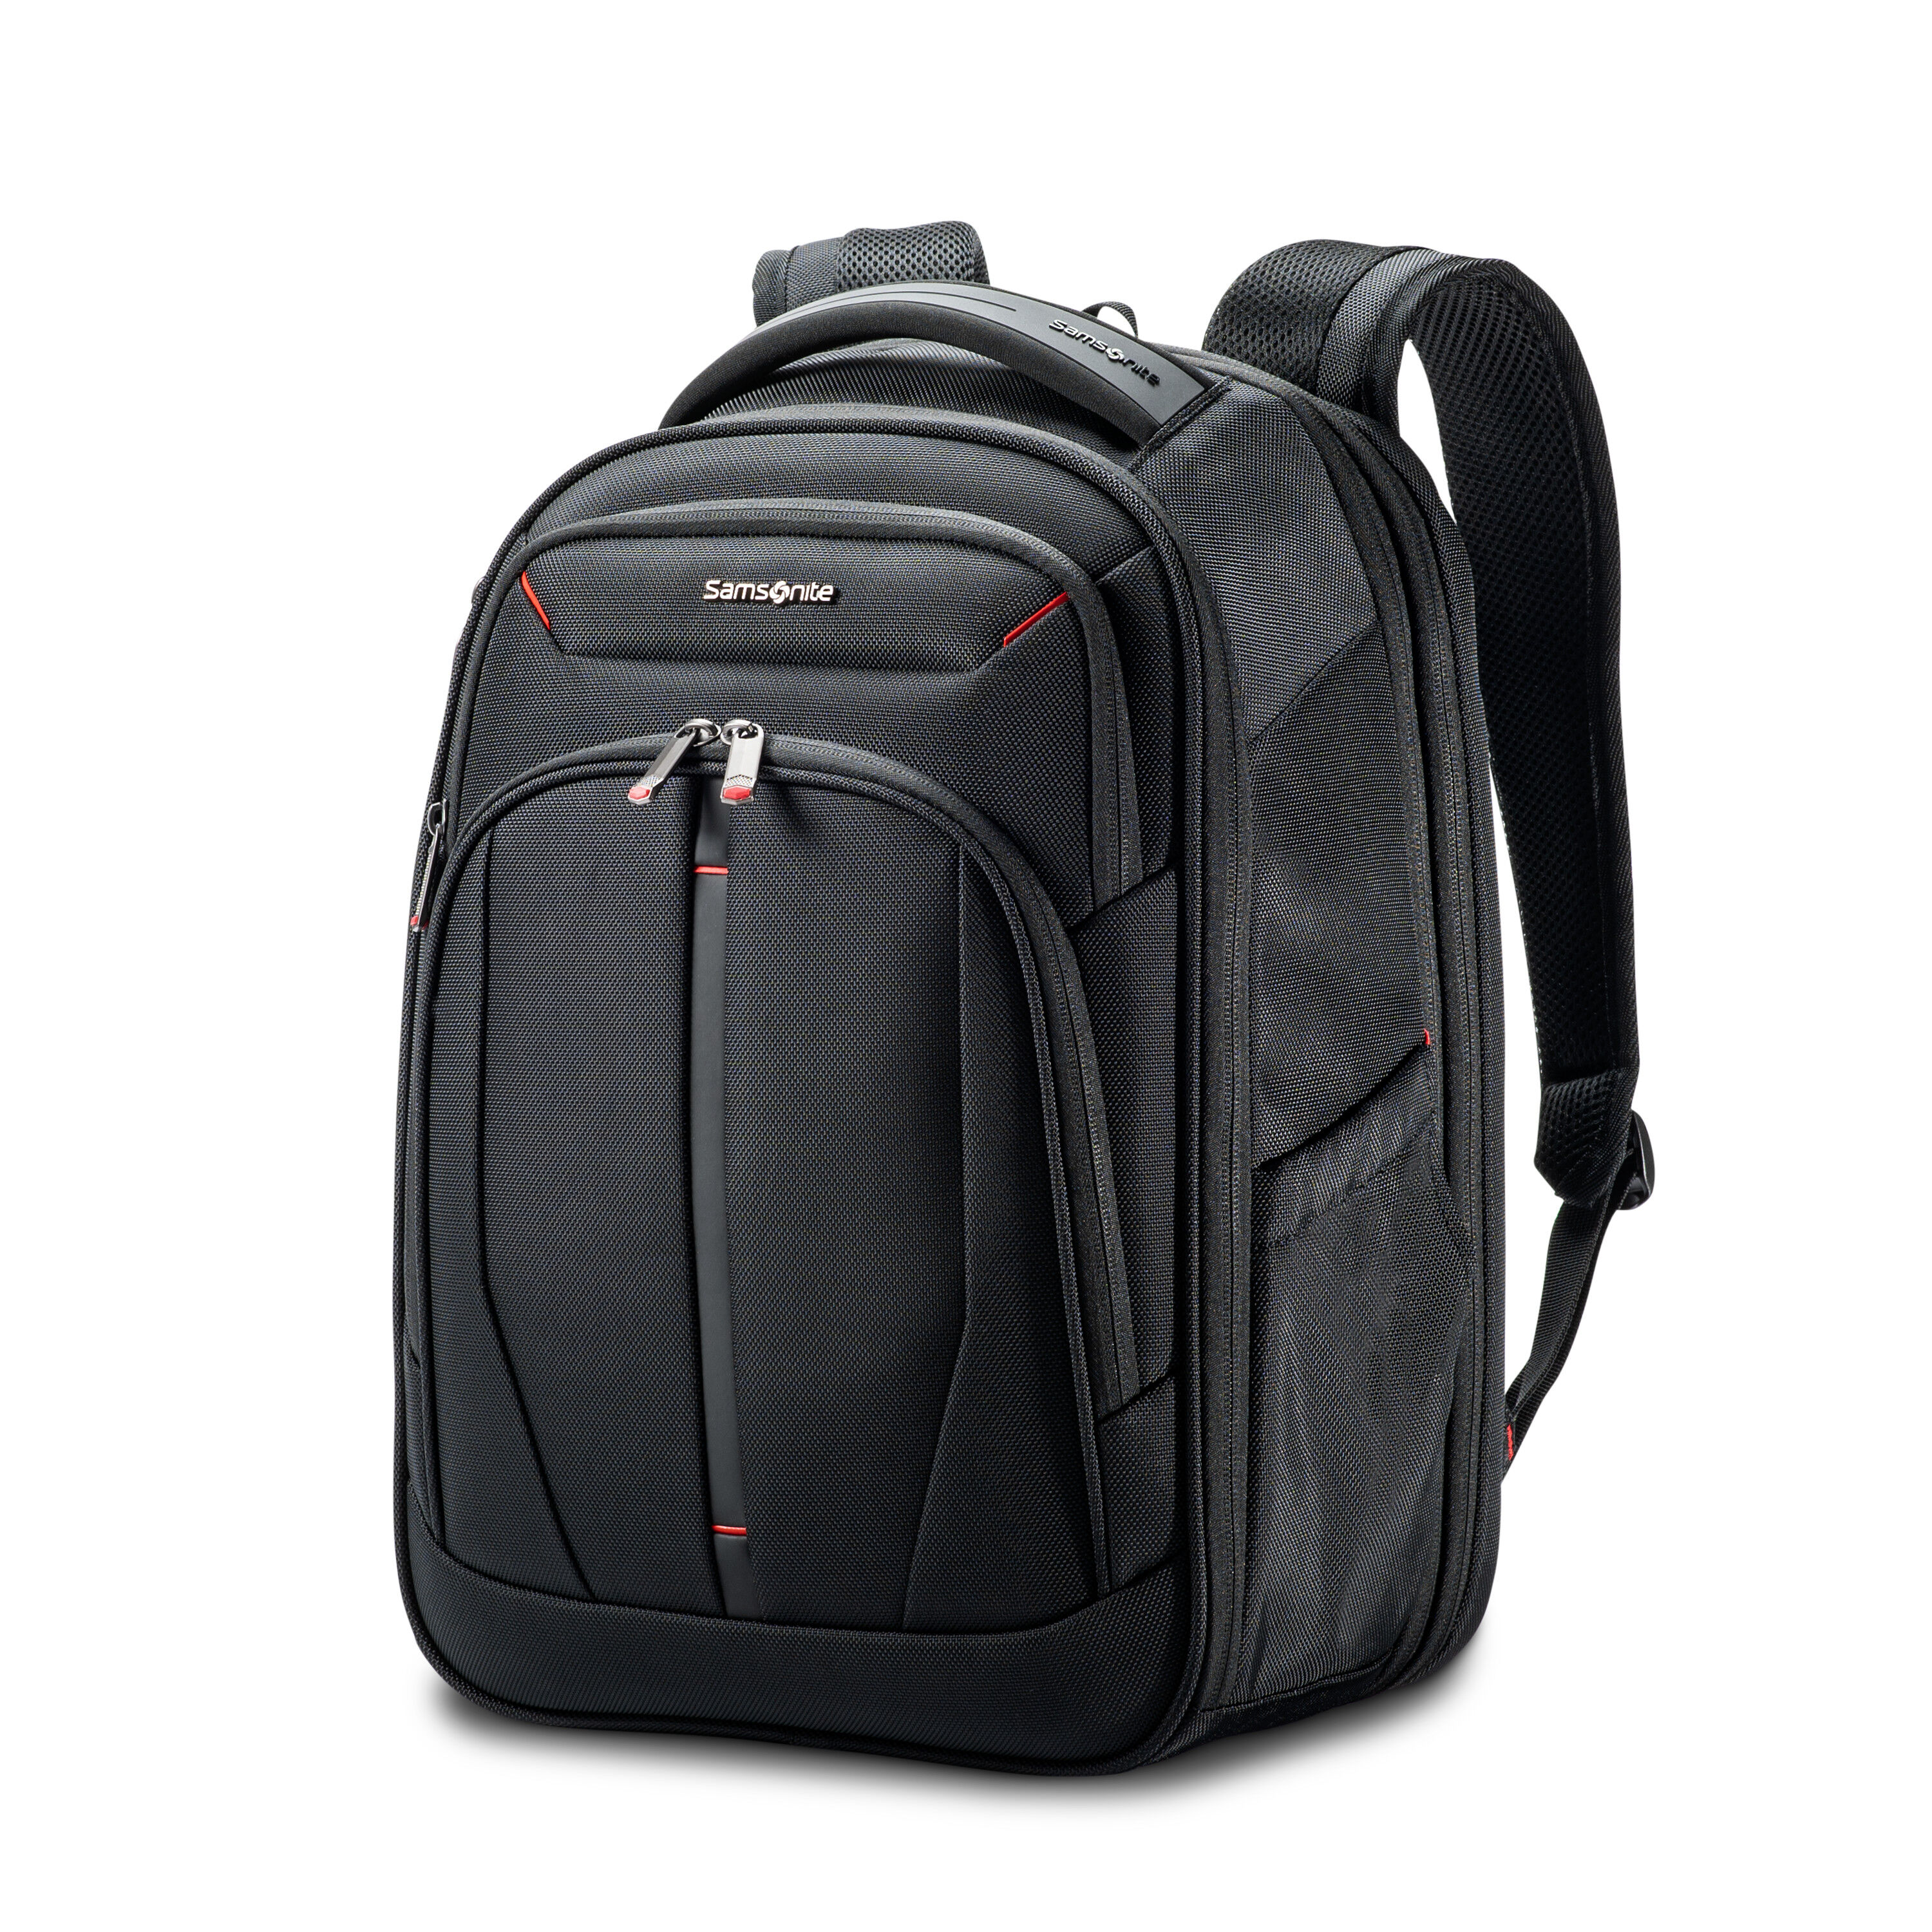 Buy Xenon 4.0 Large Expandable Backpack for USD 99.99 | Samsonite US